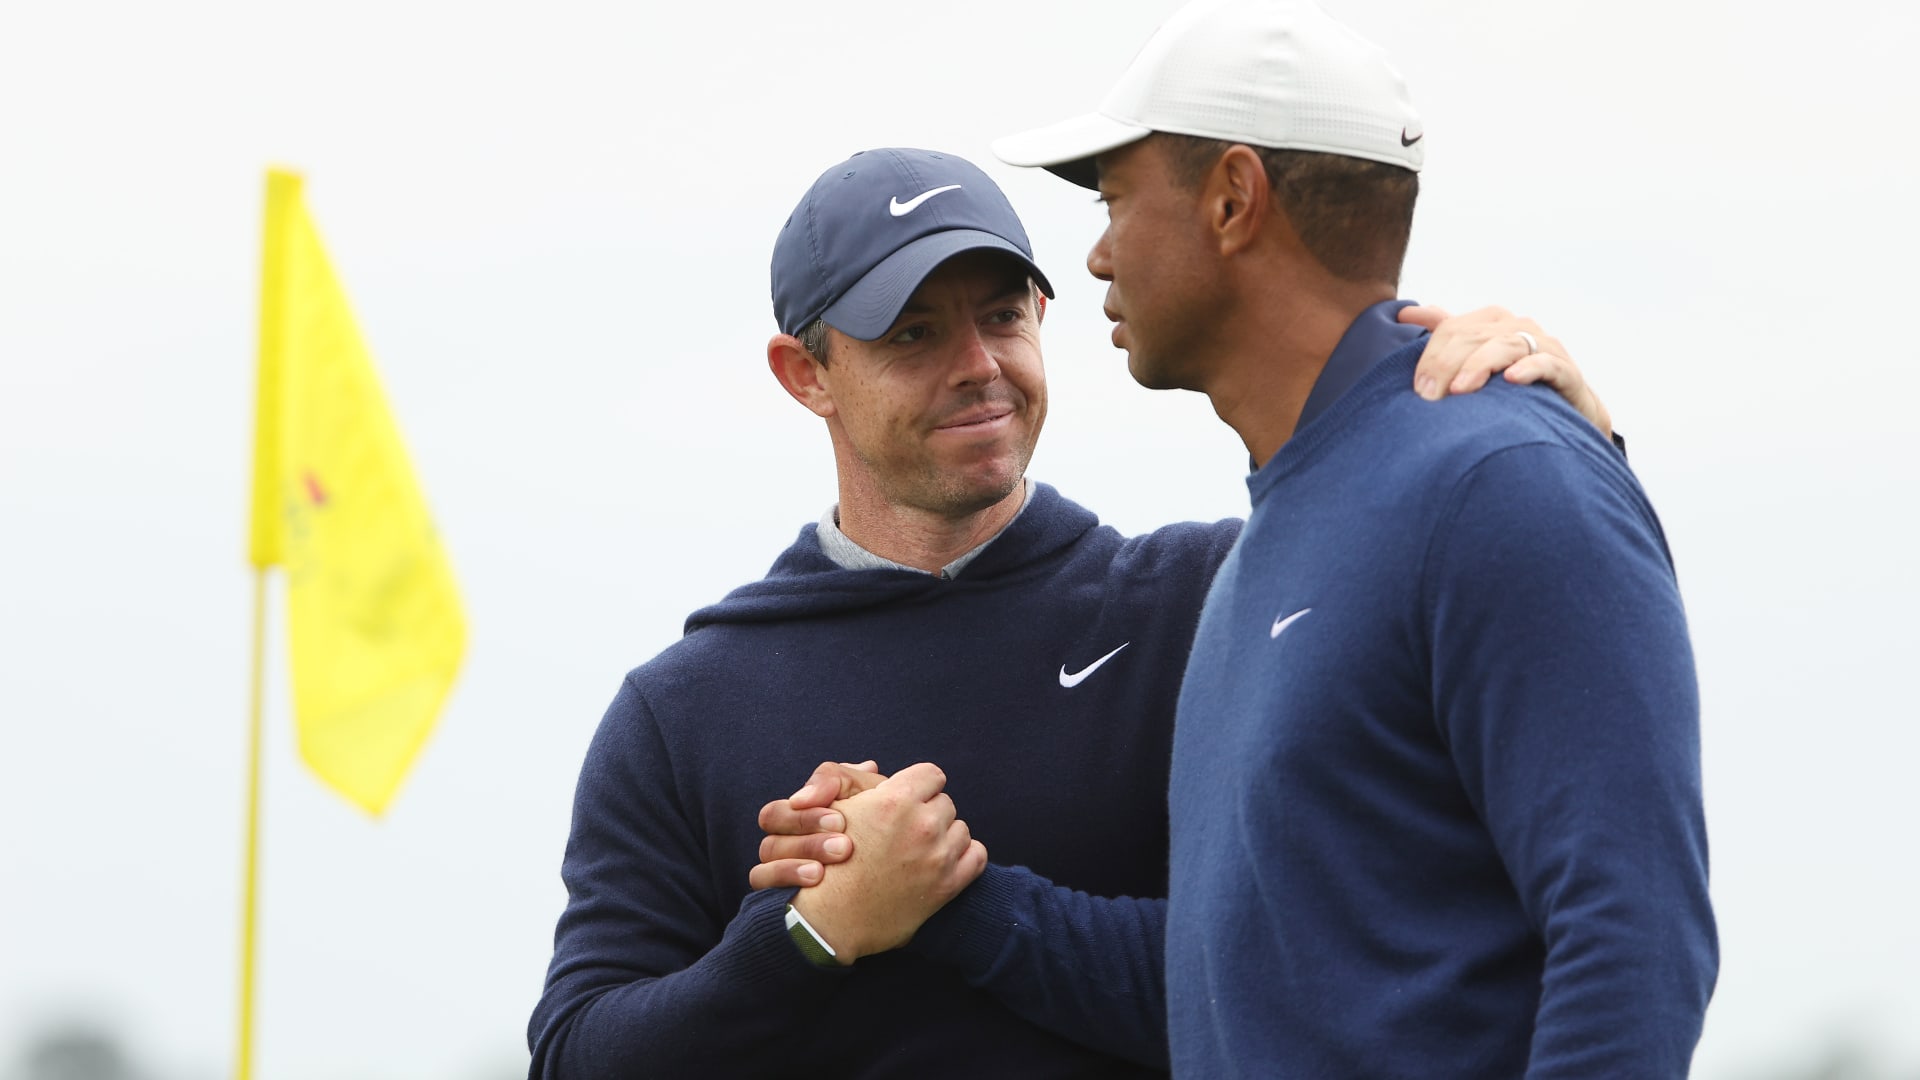 Tiger Woods and Rory McIlroy’s TGL golf league will air on ESPN